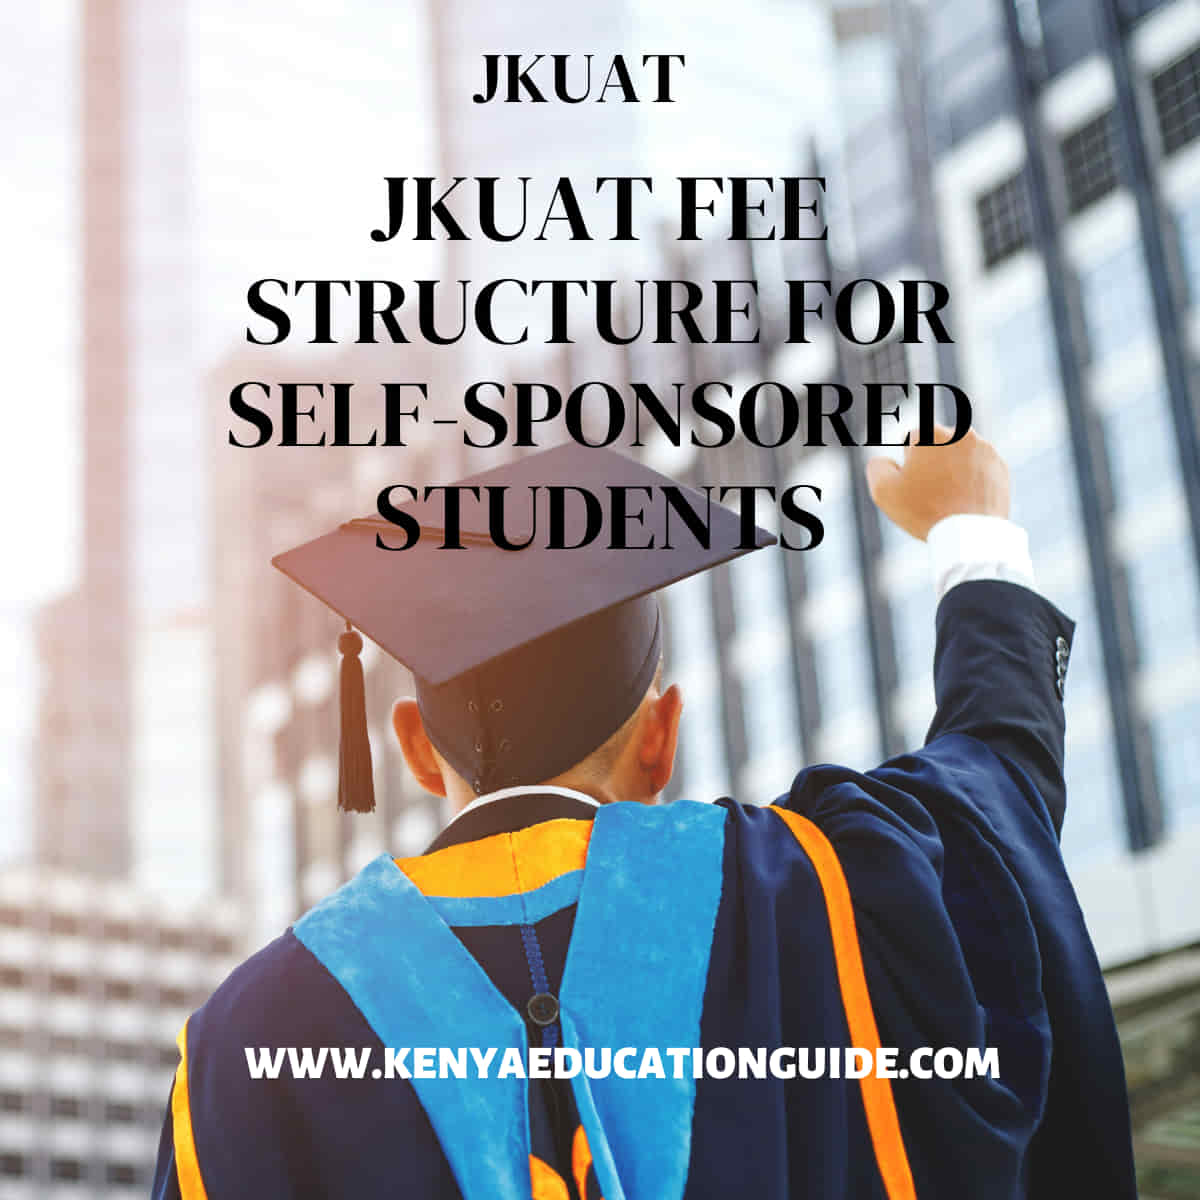 JKUAT fee structure for self-sponsored students